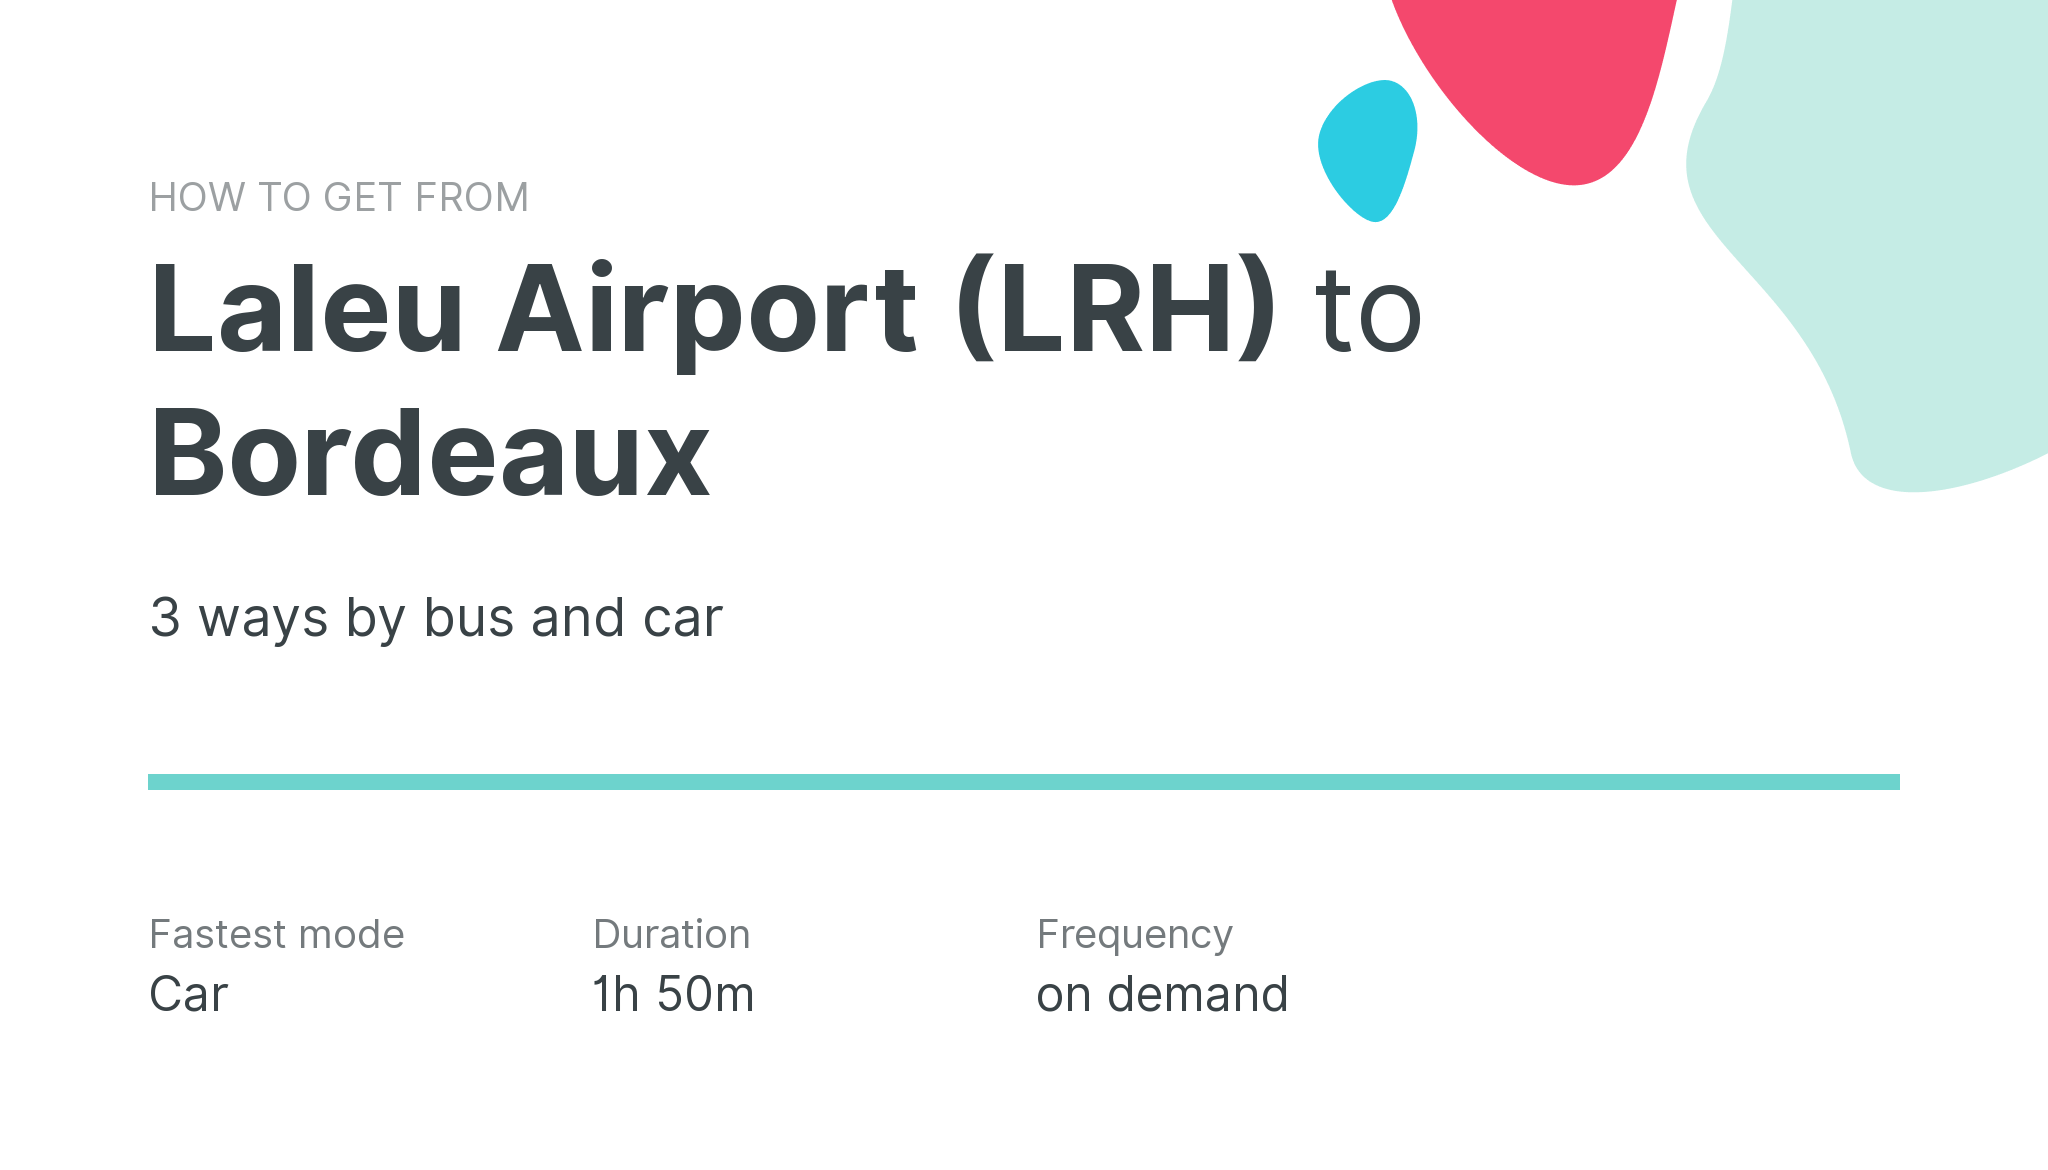 How do I get from Laleu Airport (LRH) to Bordeaux